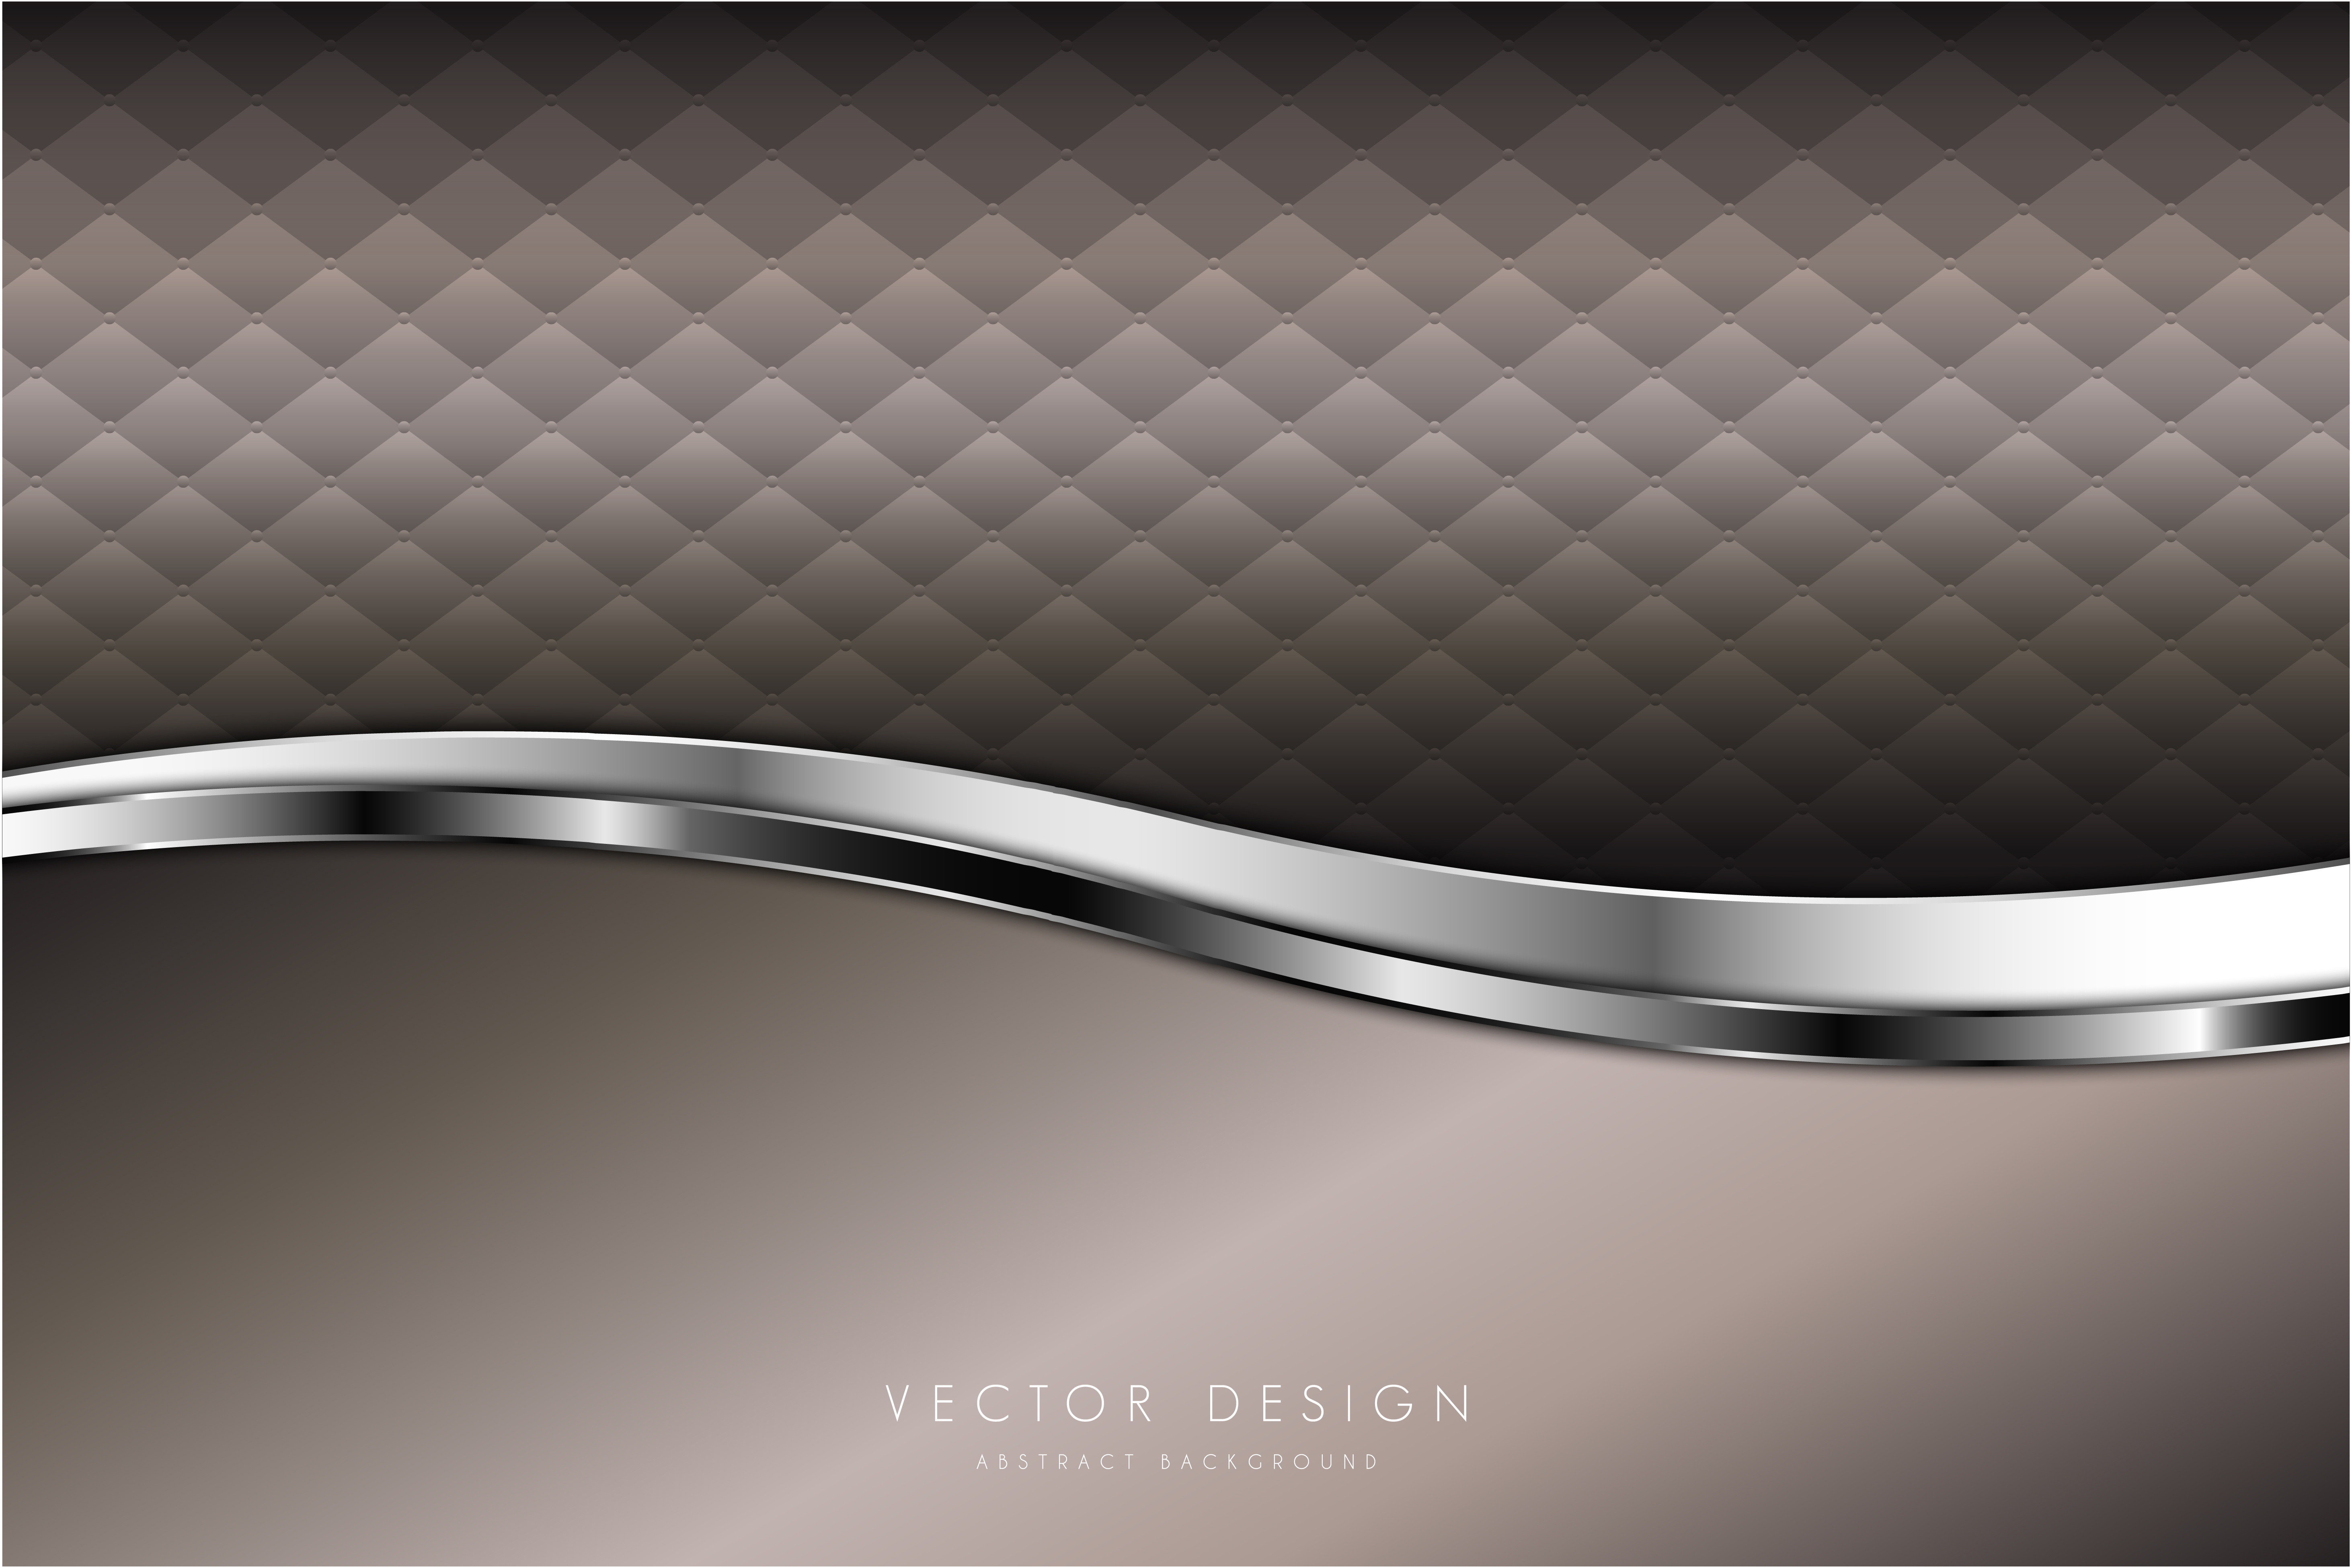 Luxury Metallic Brown And Silver Background Download Free Vectors Clipart Graphics Vector Art